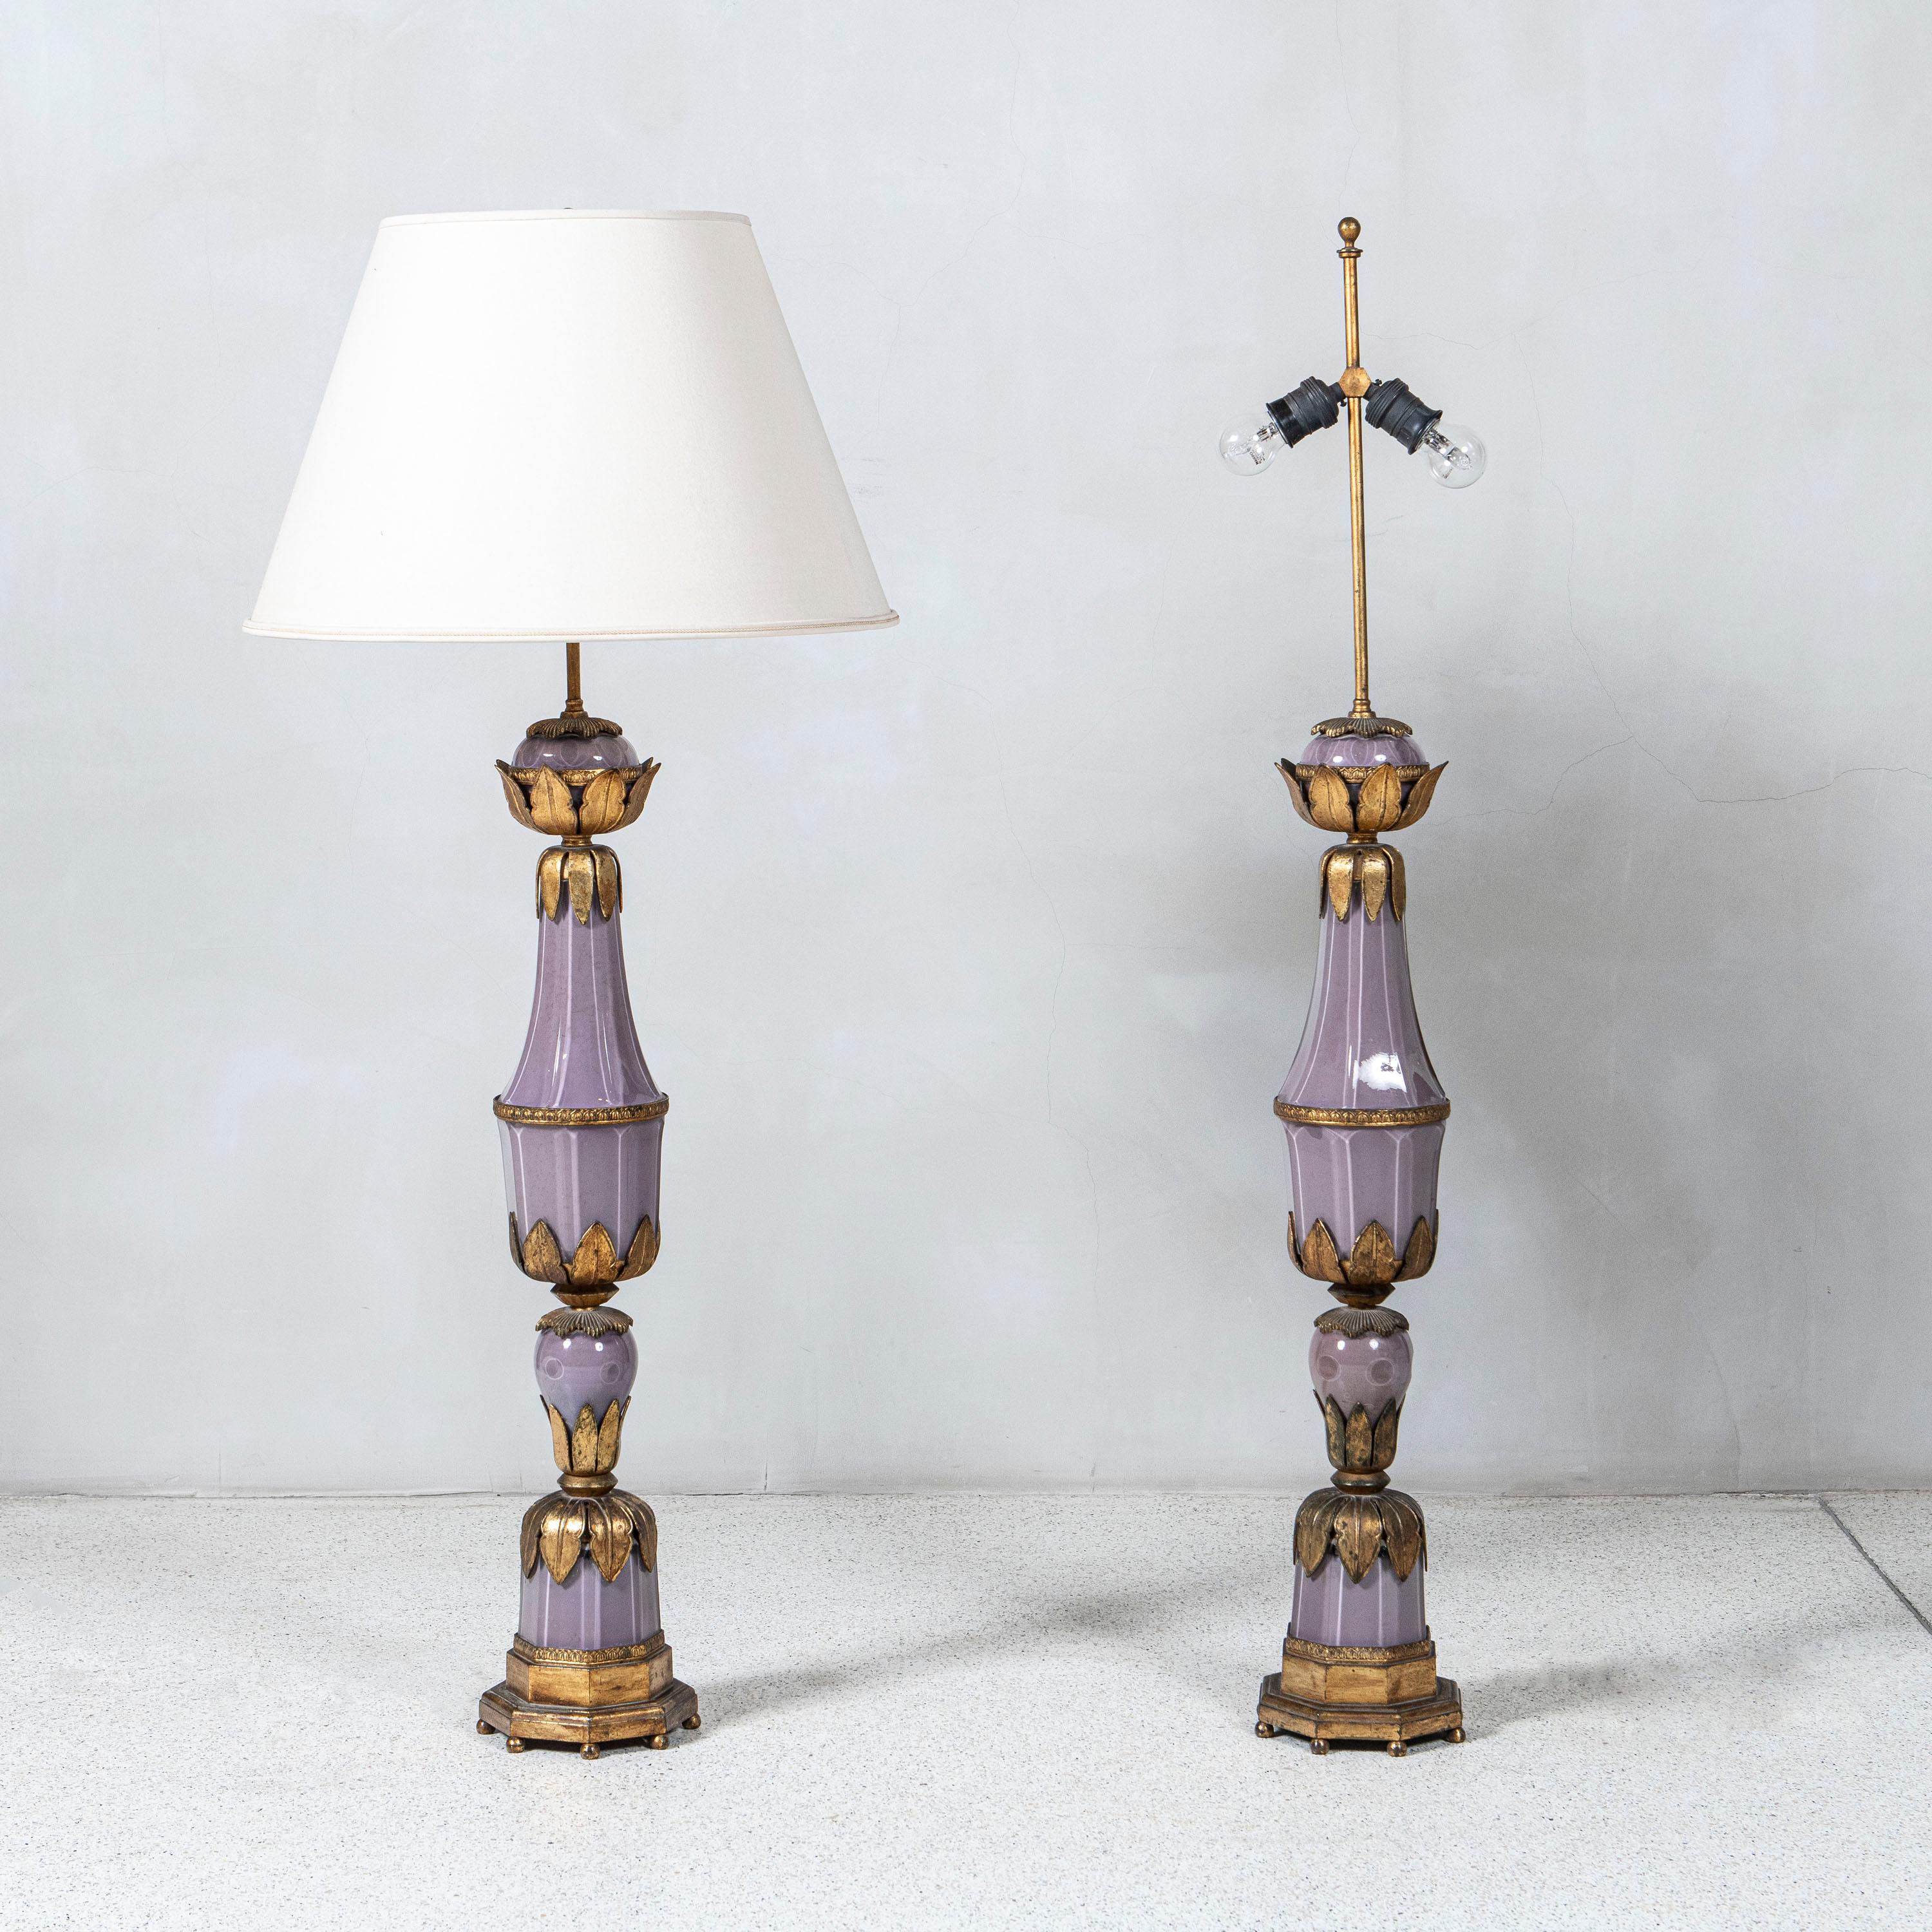 Pair of Bronze and glass table lamps Maison Jansen, France, circa 1940-1950.
Doesn't include lampshade.